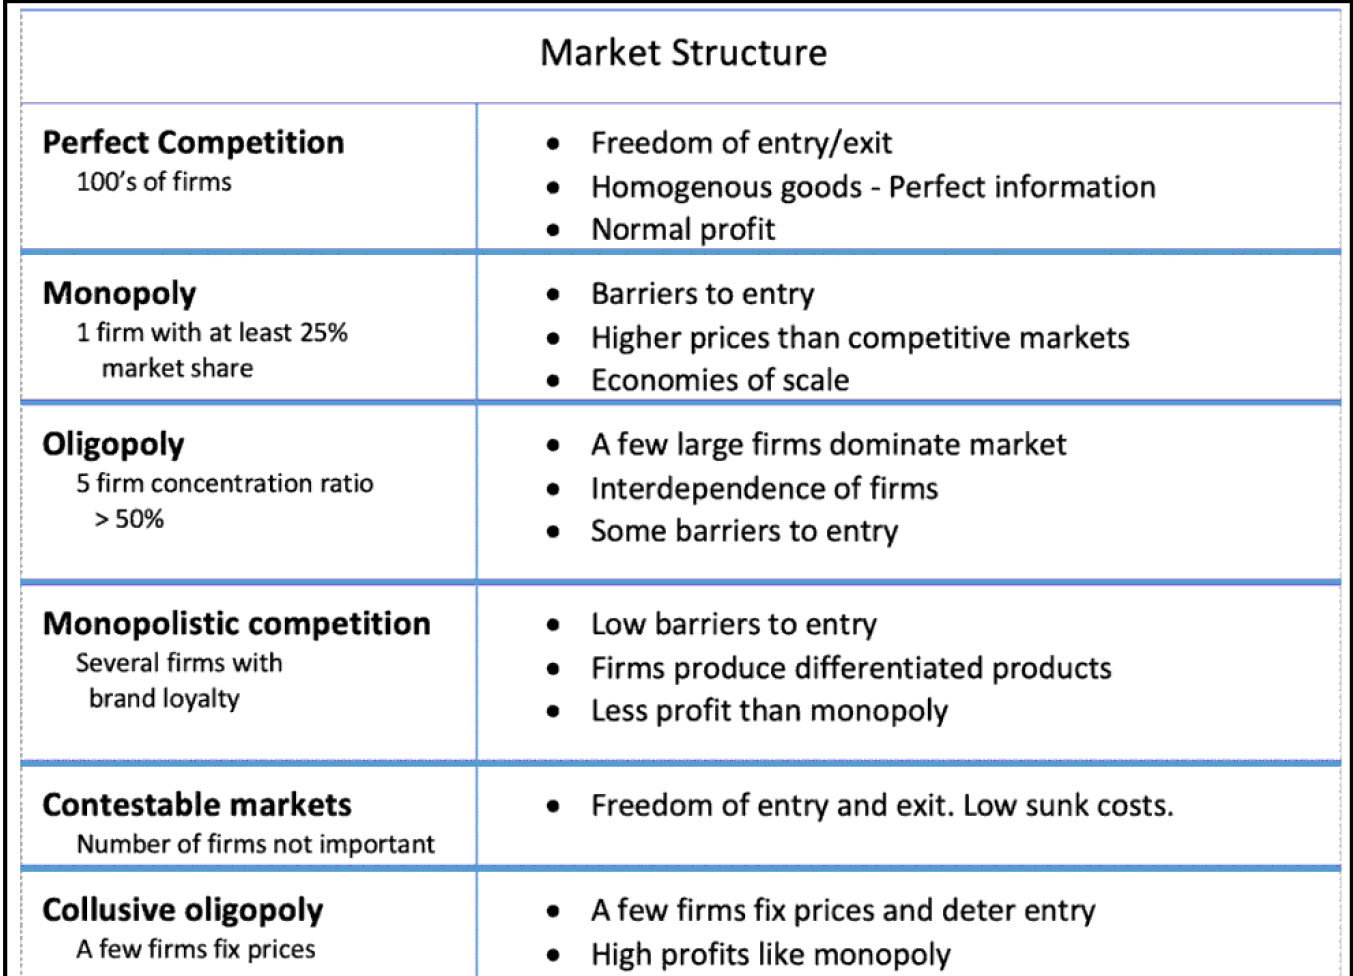 features of perfect competition and monopoly